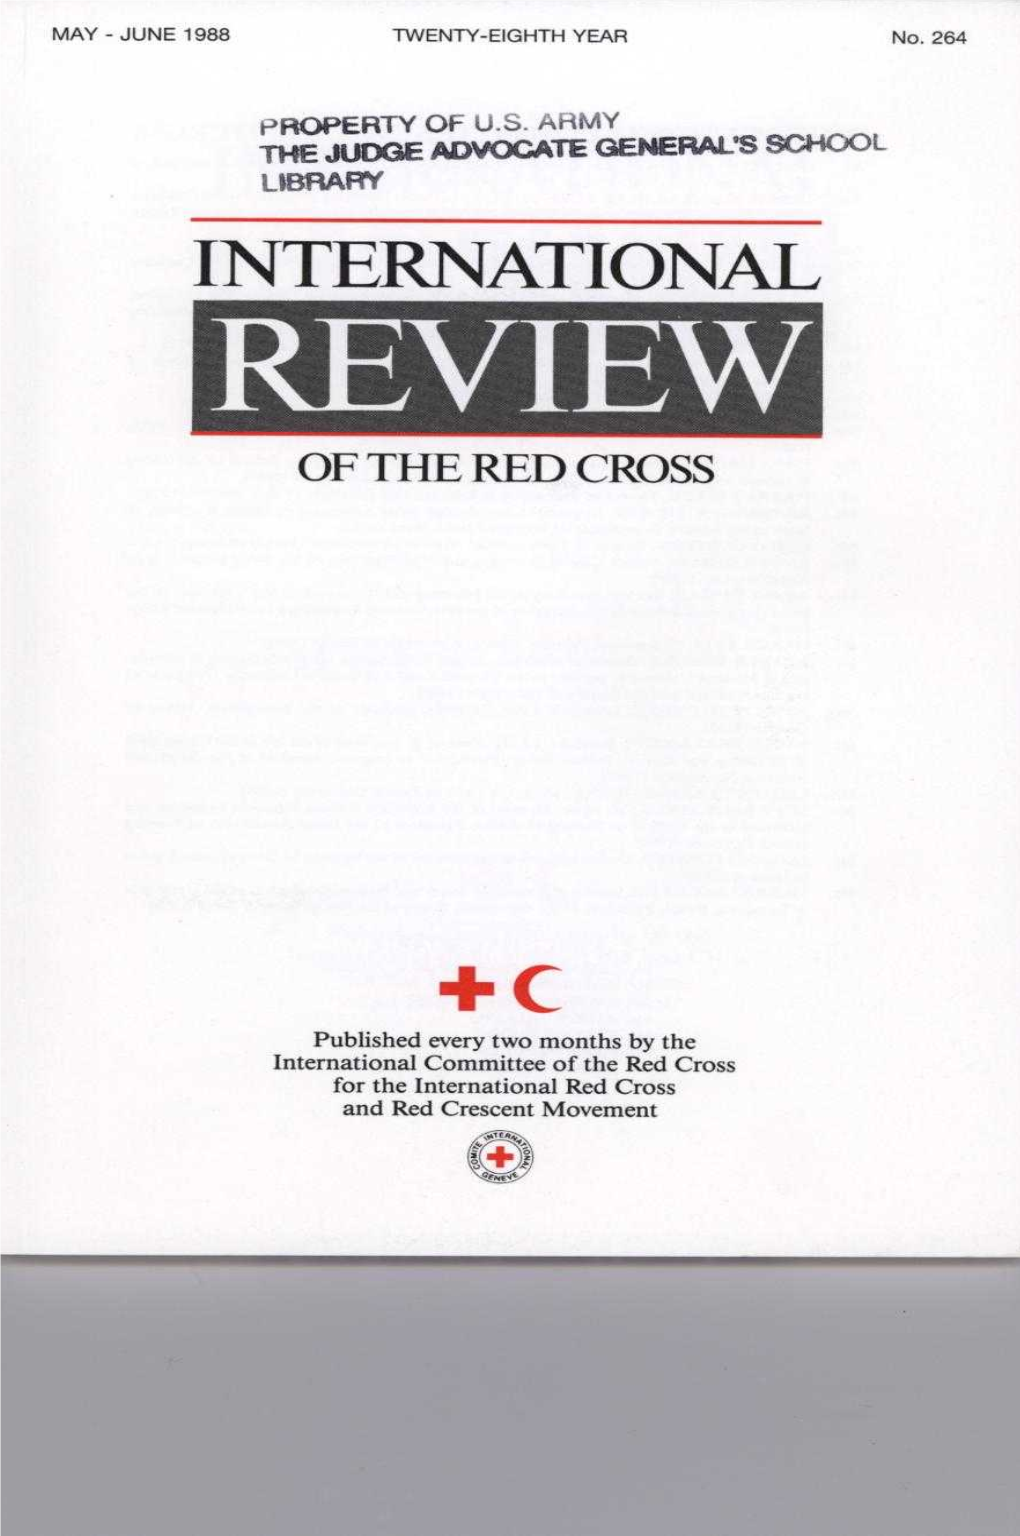 International Review of the Red Cross, May-June 1988, No